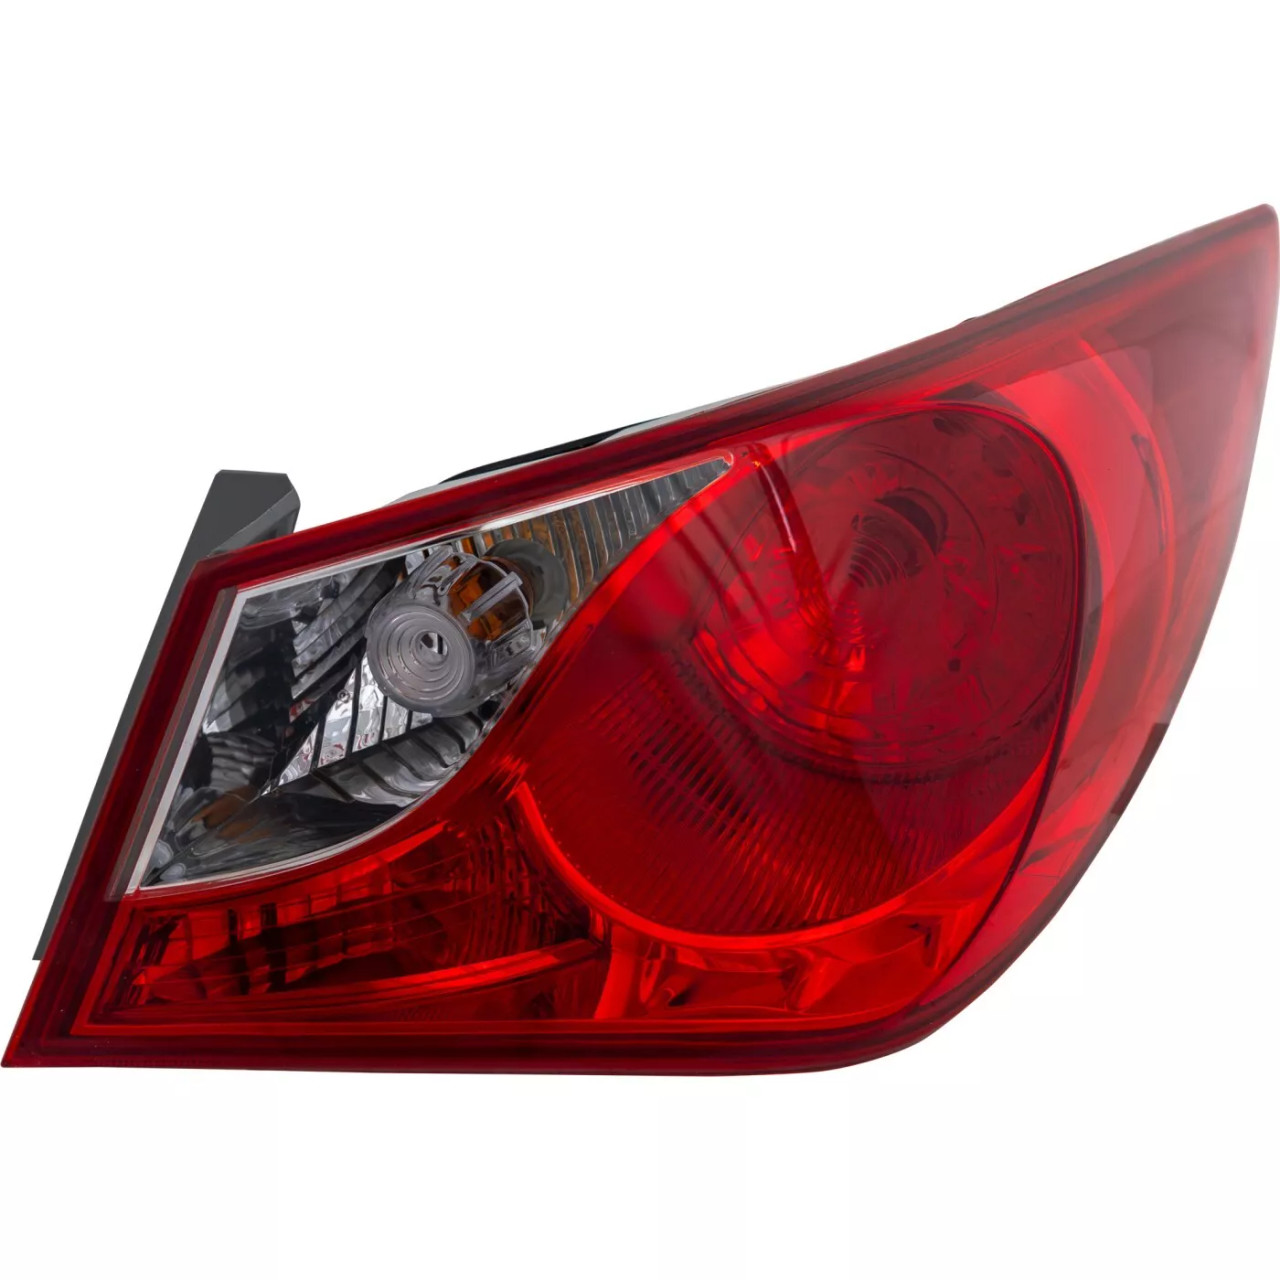 Pair Tail Light for 2011-2014 Hyundai Sonata LH RH Outer Body Mounted